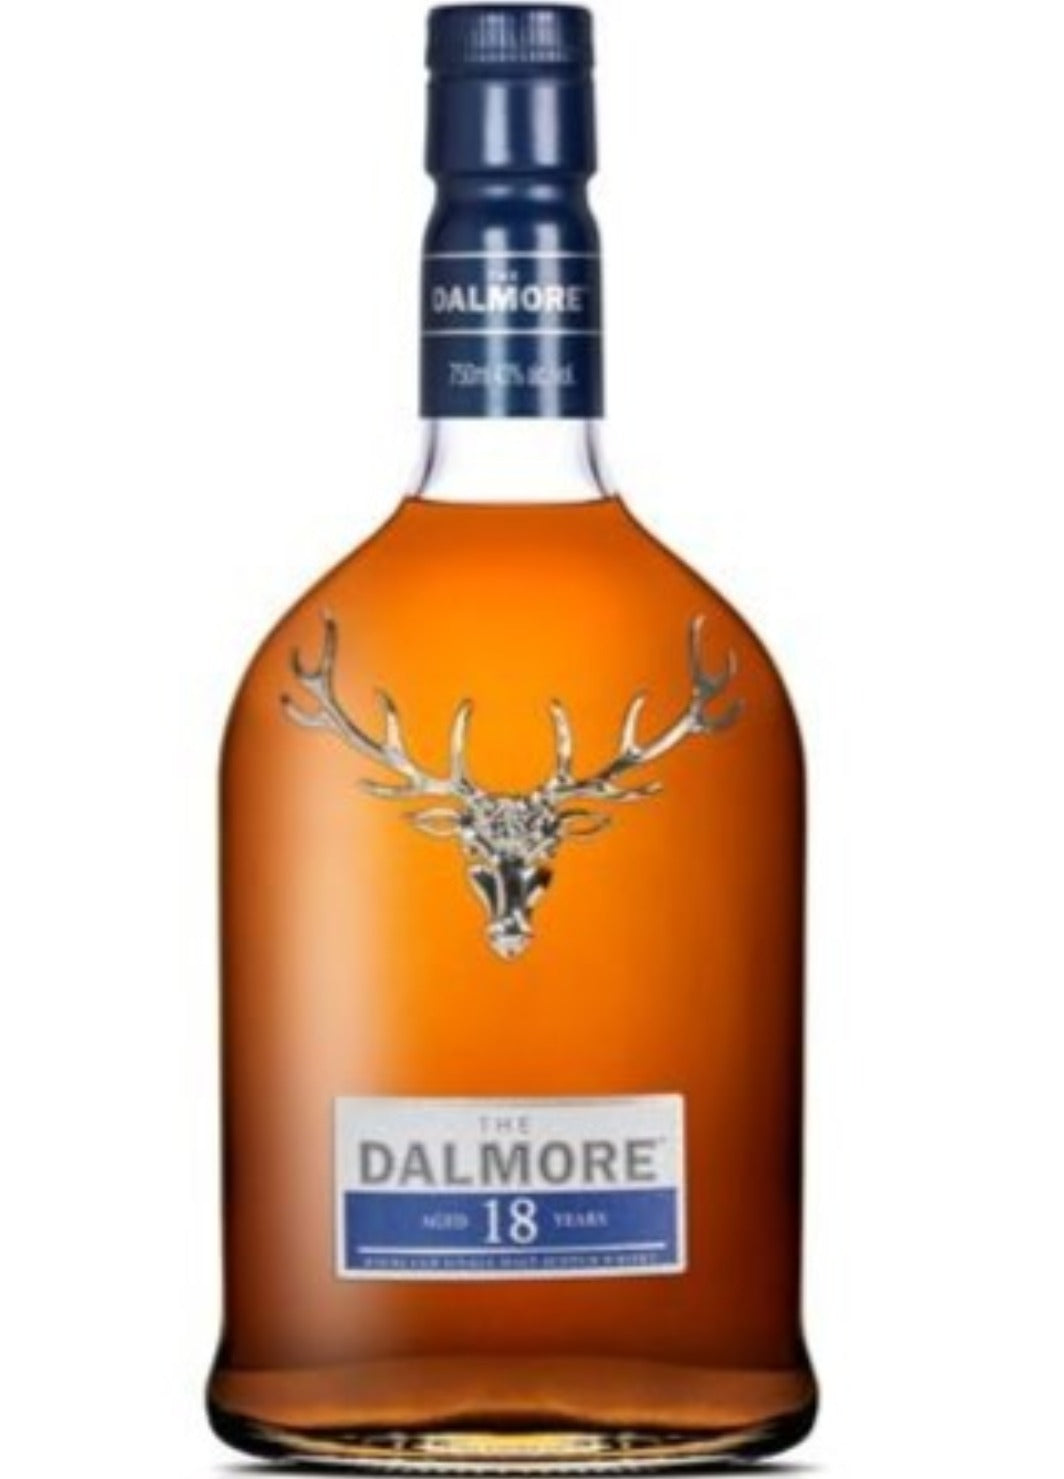 The Dalmore 18 Year Old - Premium Whisky from The Dalmore - Shop now at Whiskery